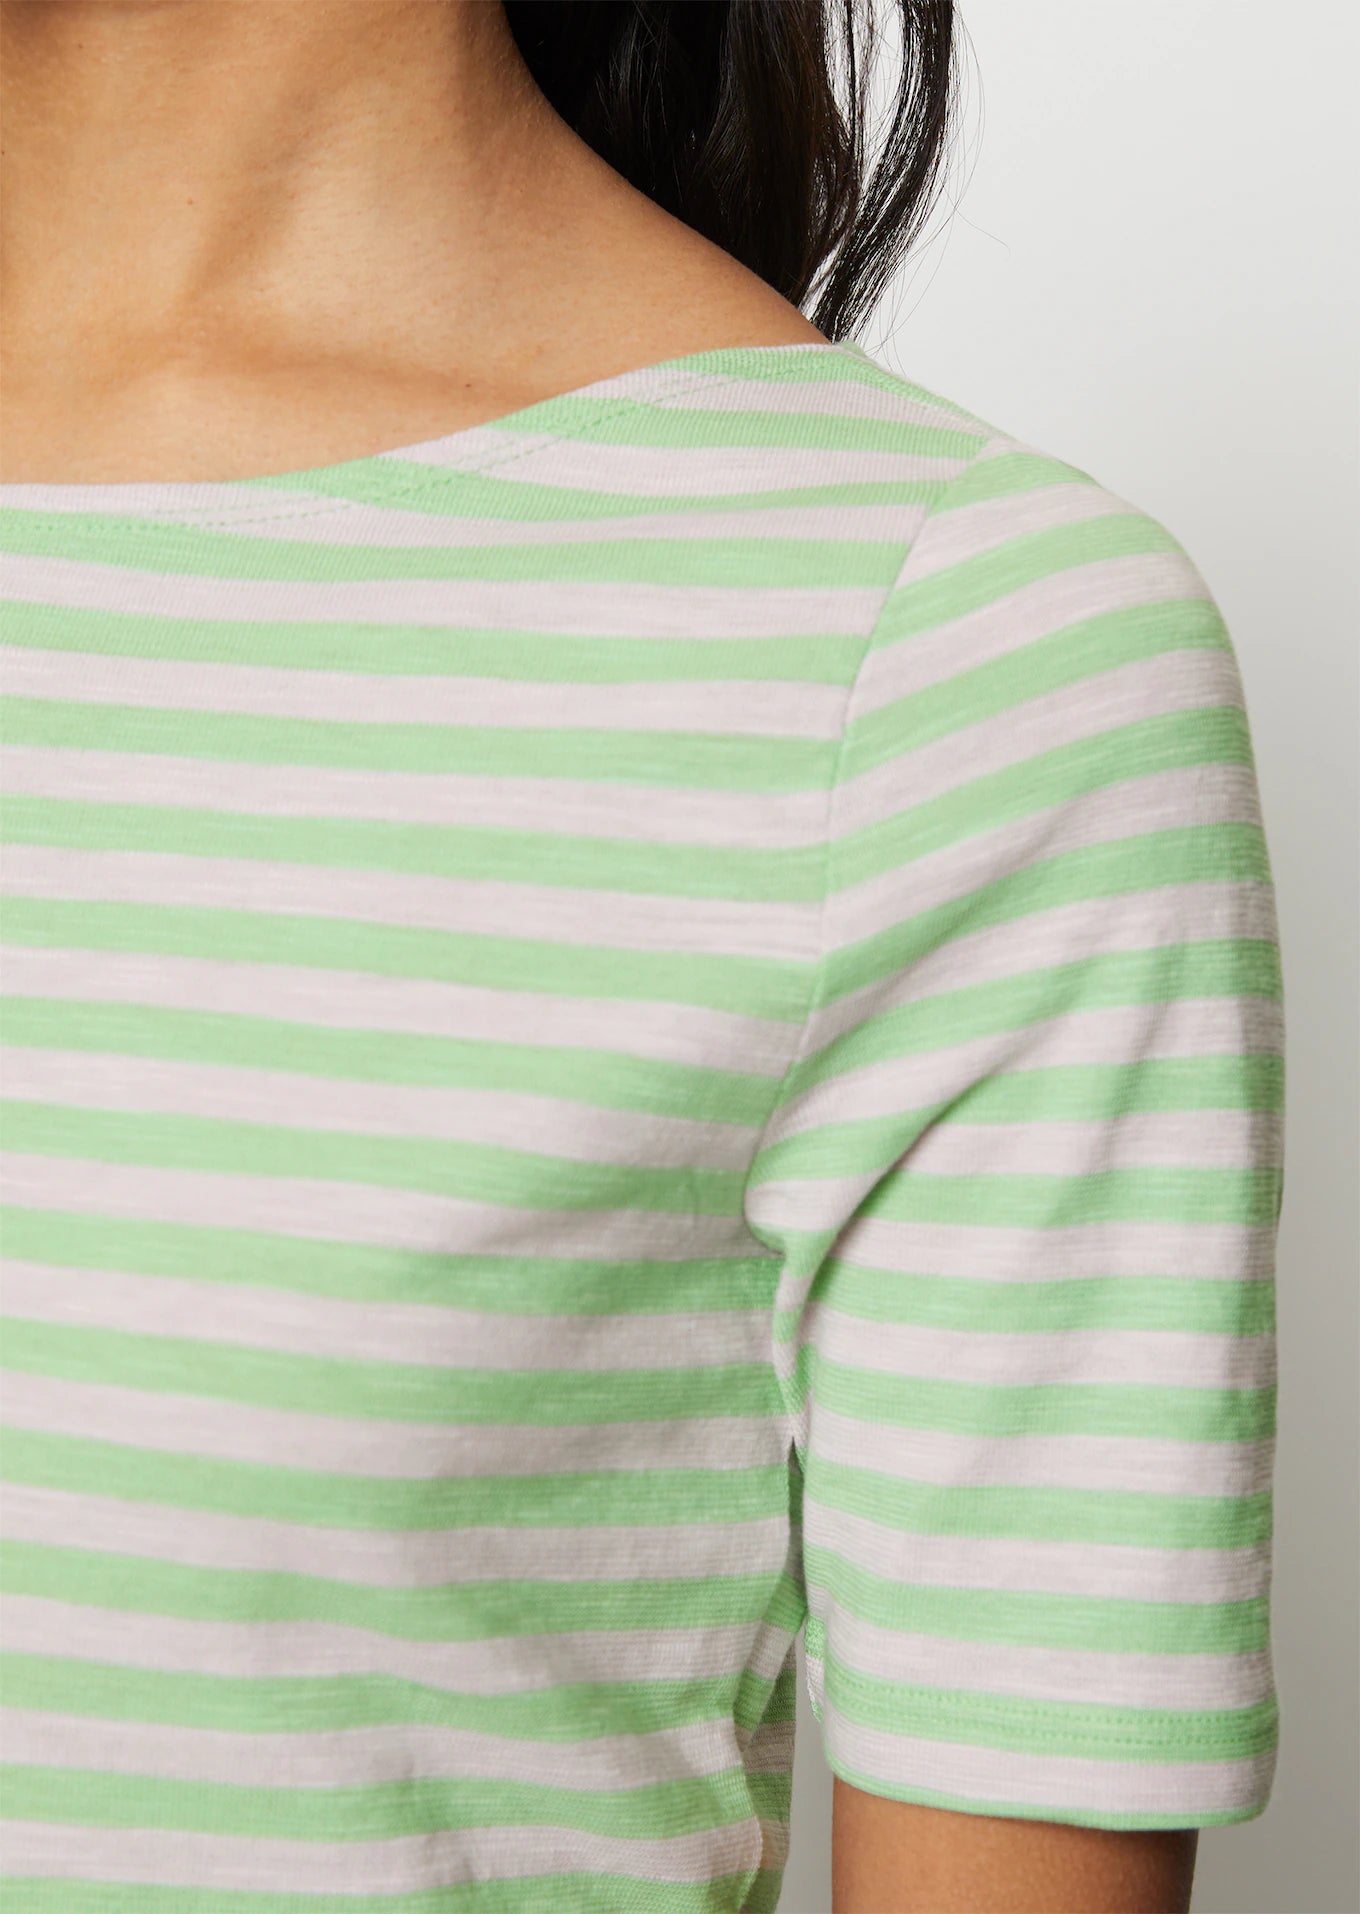 Boat Neck T-Shirt in Pure Mint